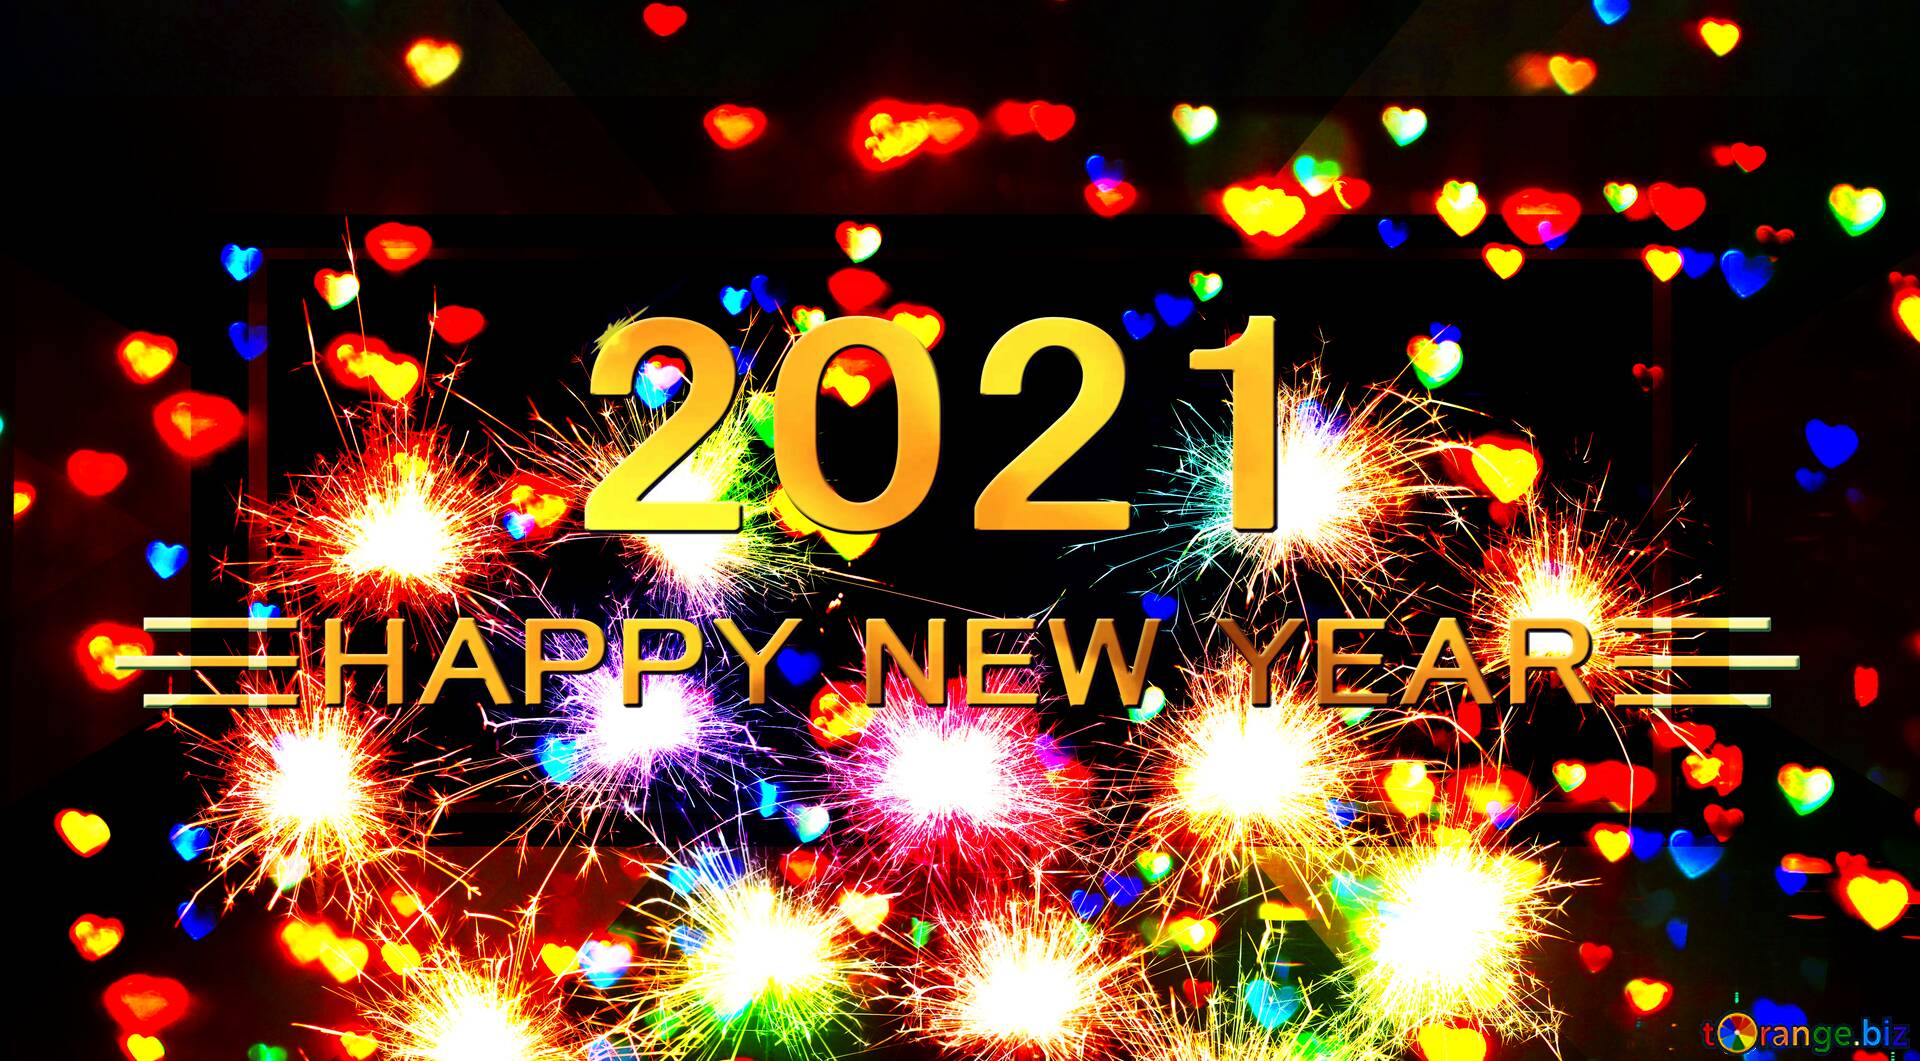 1920x1061 Download Free Picture Christmas Festive Lights Background With Heart Banner Layout Happy New Year 2022 On Cc By License Free Image Stock Fx 212691